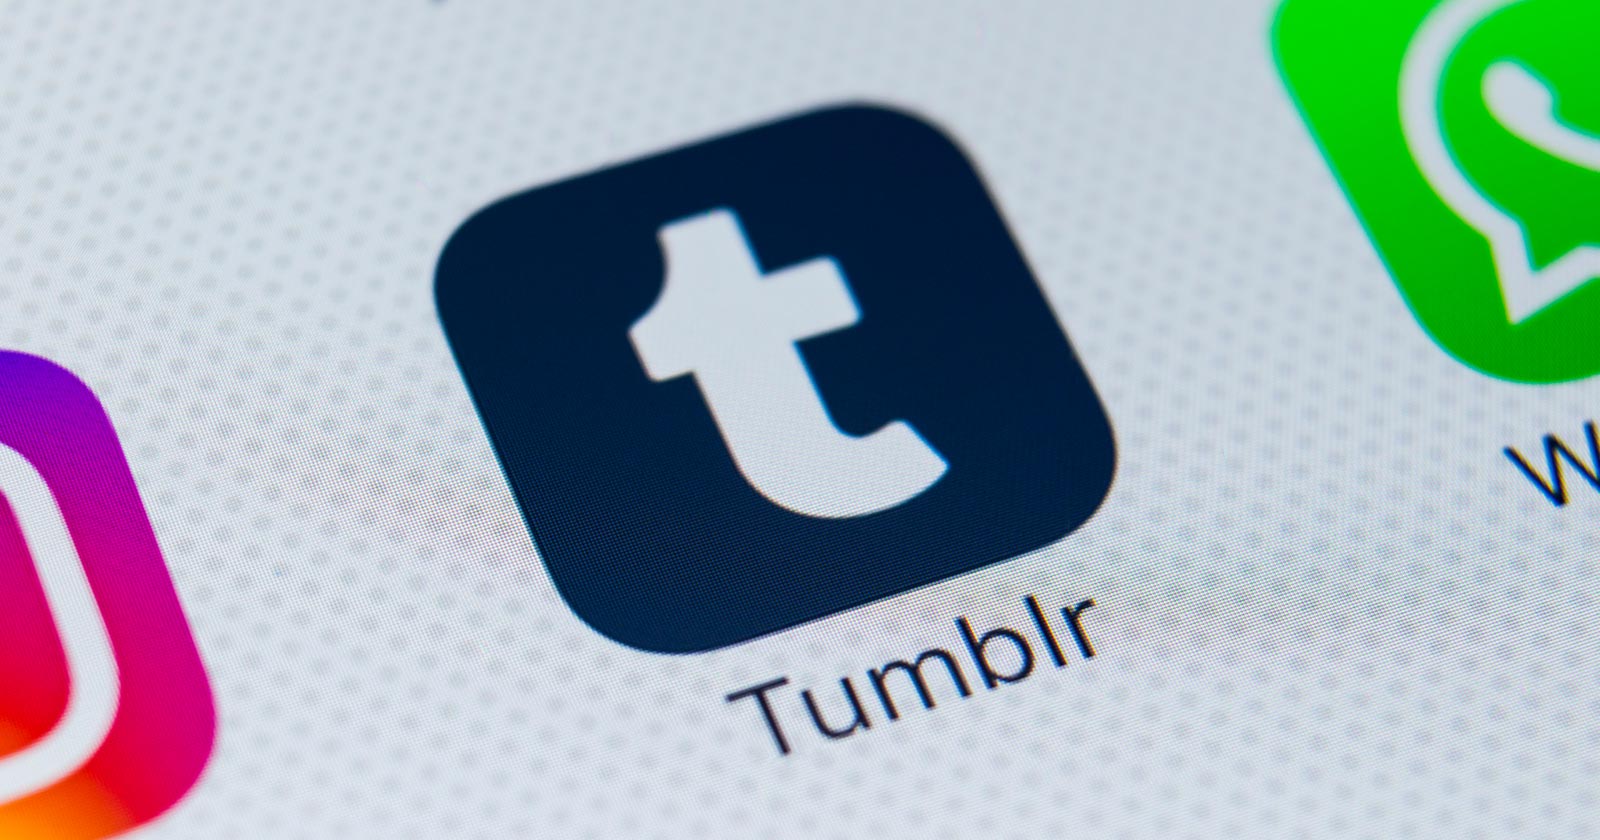 News about tumblr slowing down operations